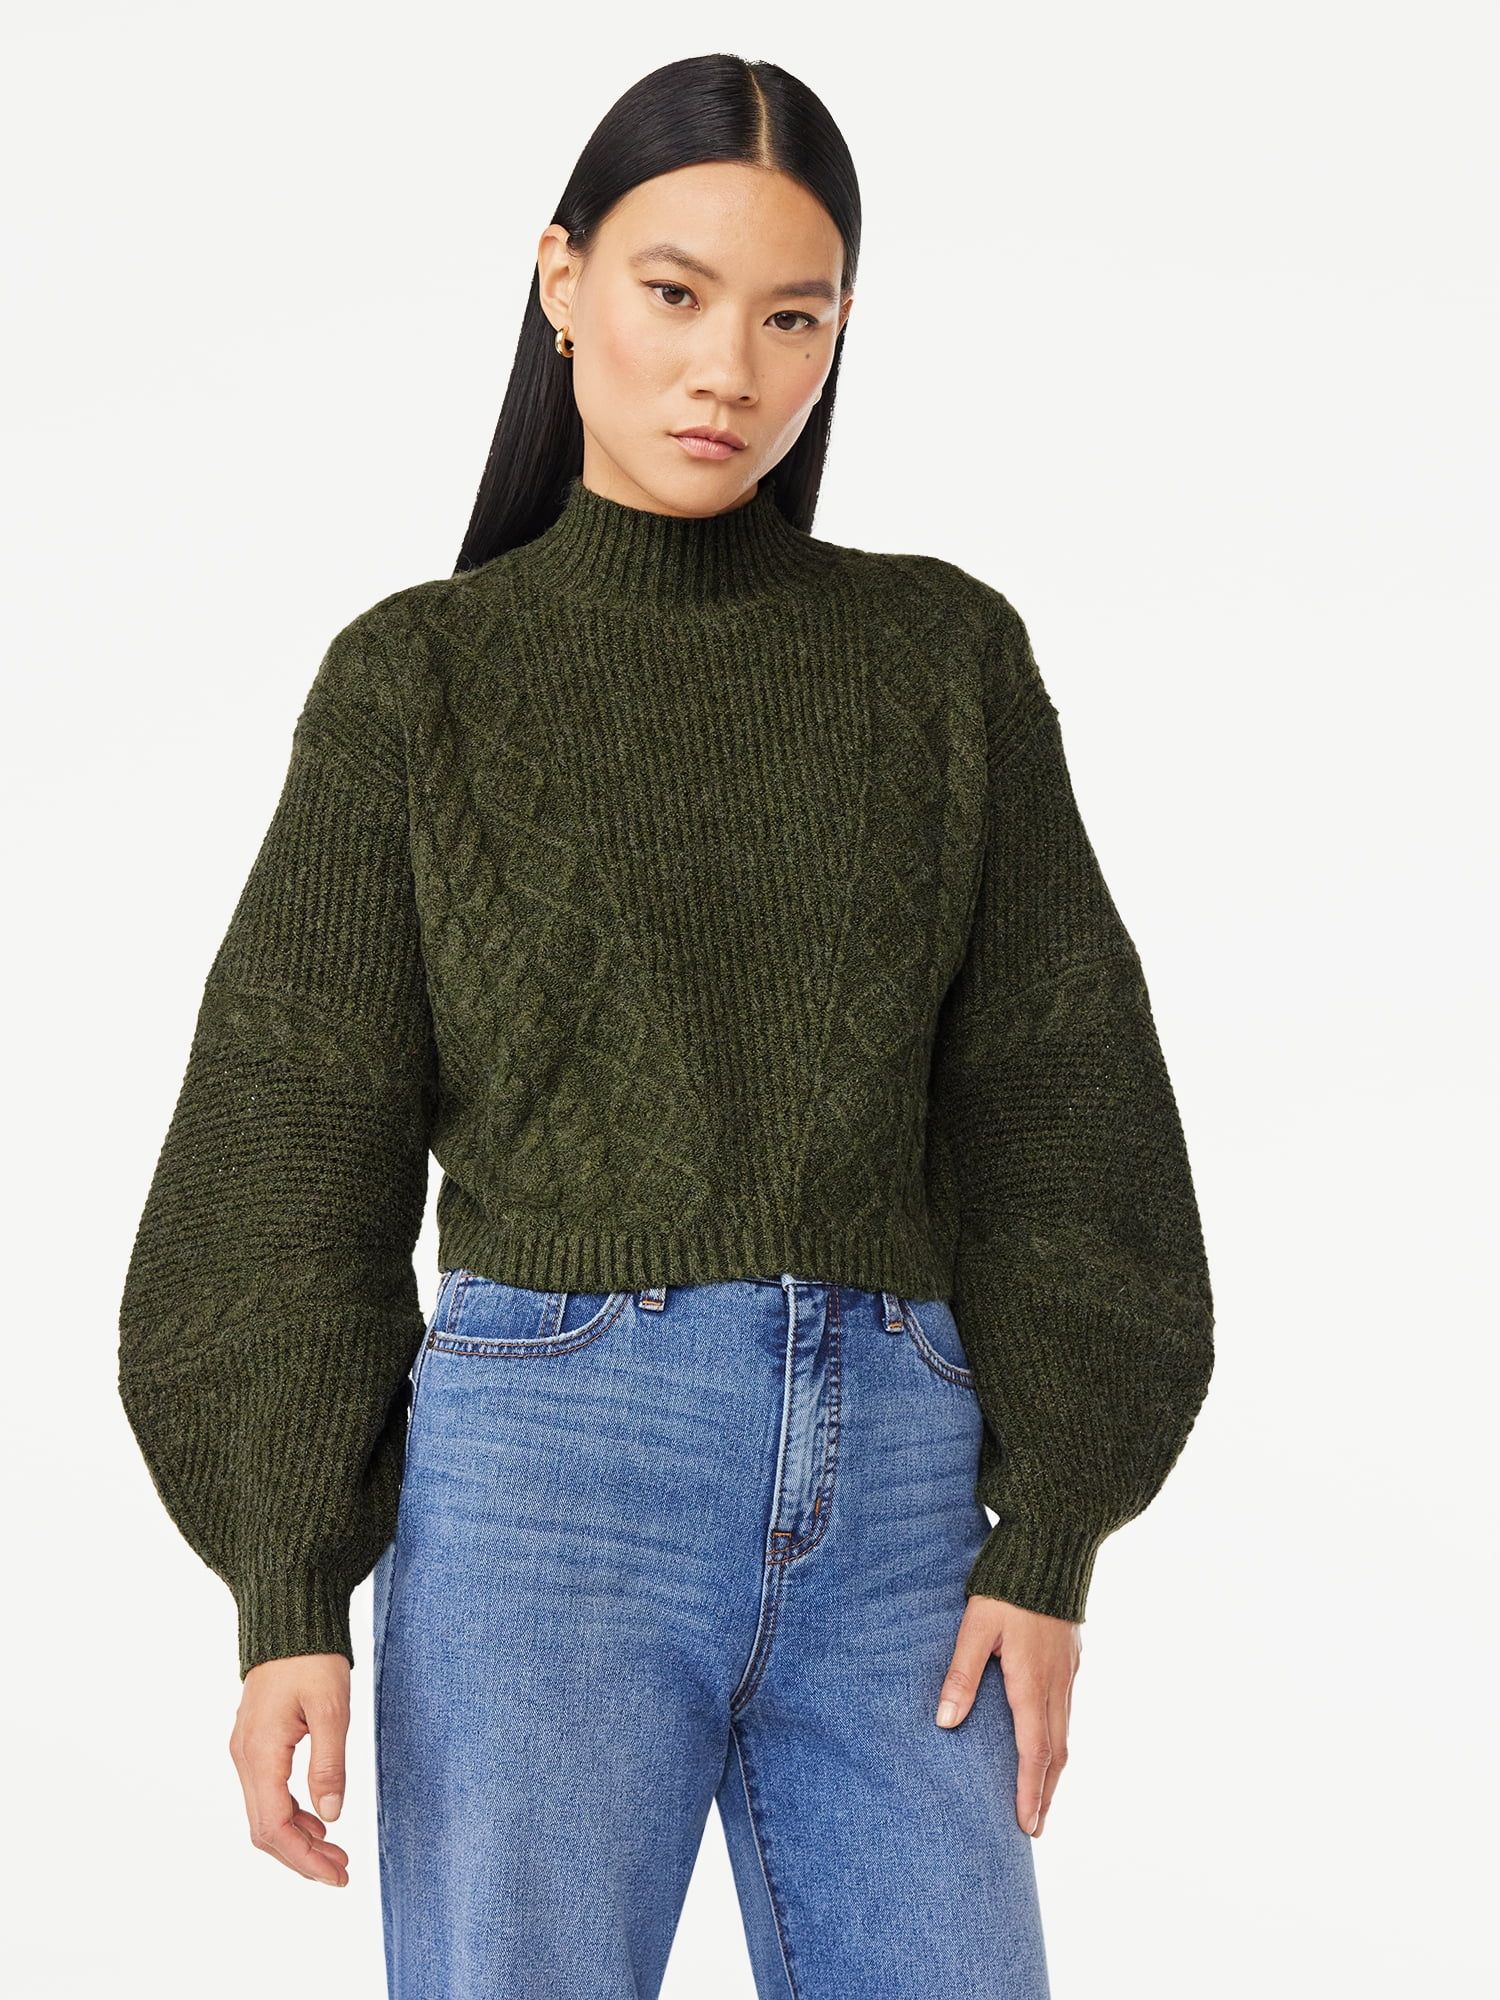 Scoop Women's Crop Cable Pullover Sweater with Long Sculpted Sleeves, Sizes XS-XXL | Walmart (US)